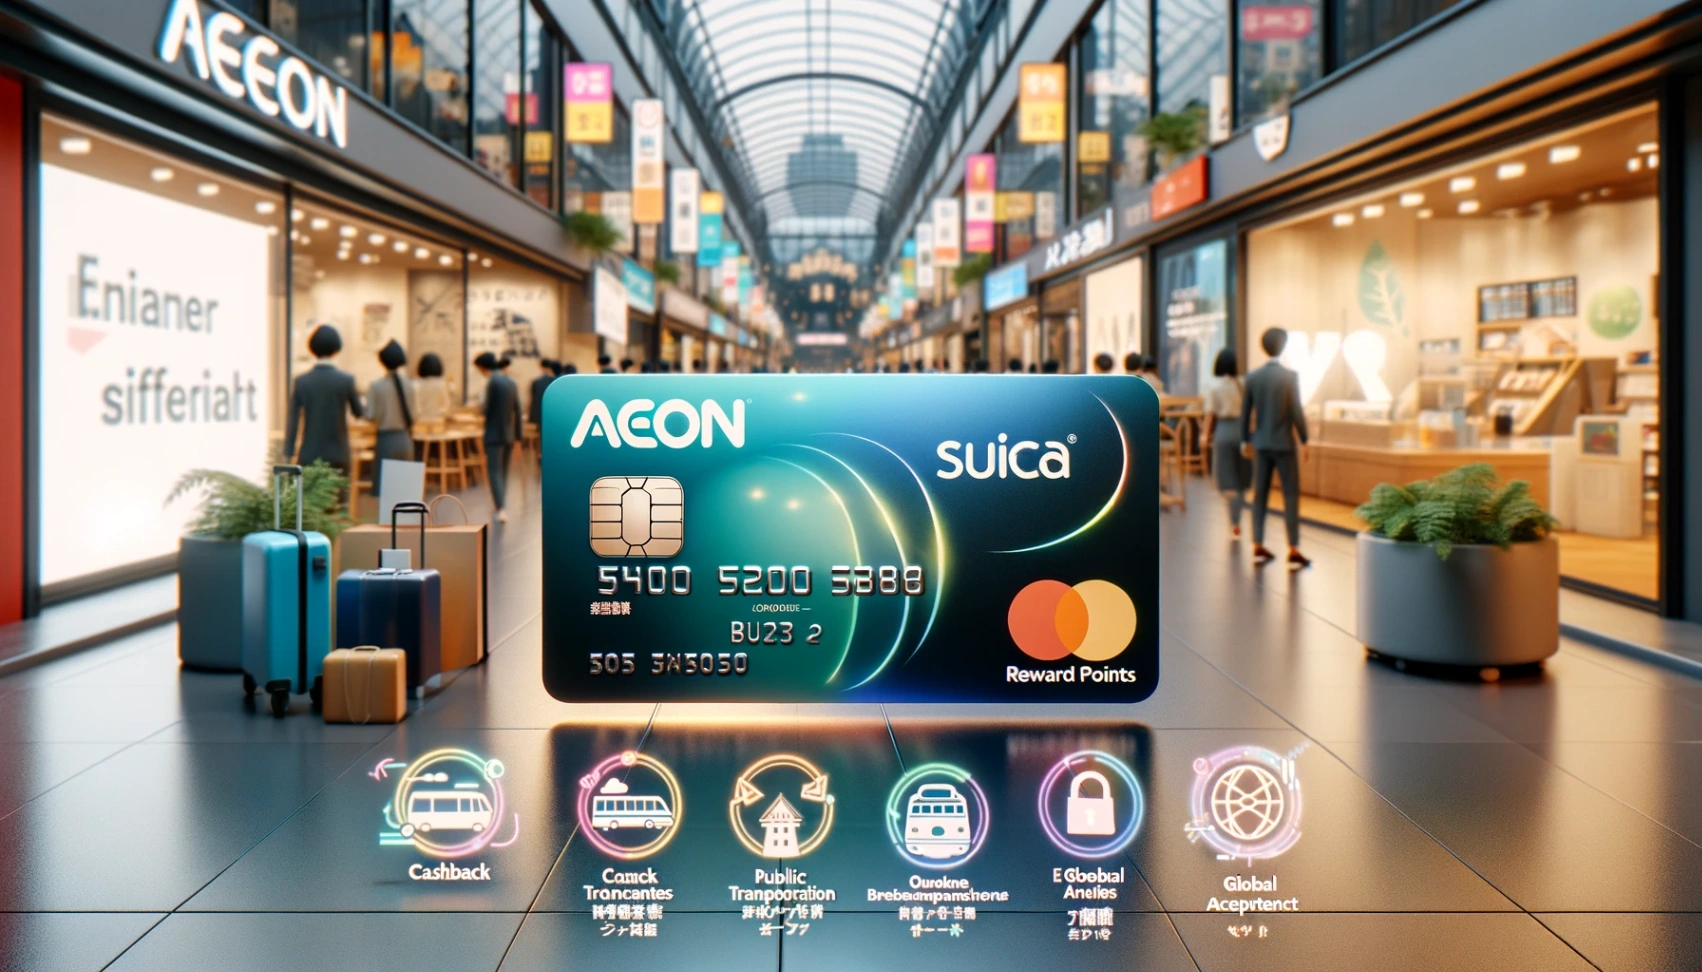 Aeon Suica Credit Card - Learn How to Apply Online